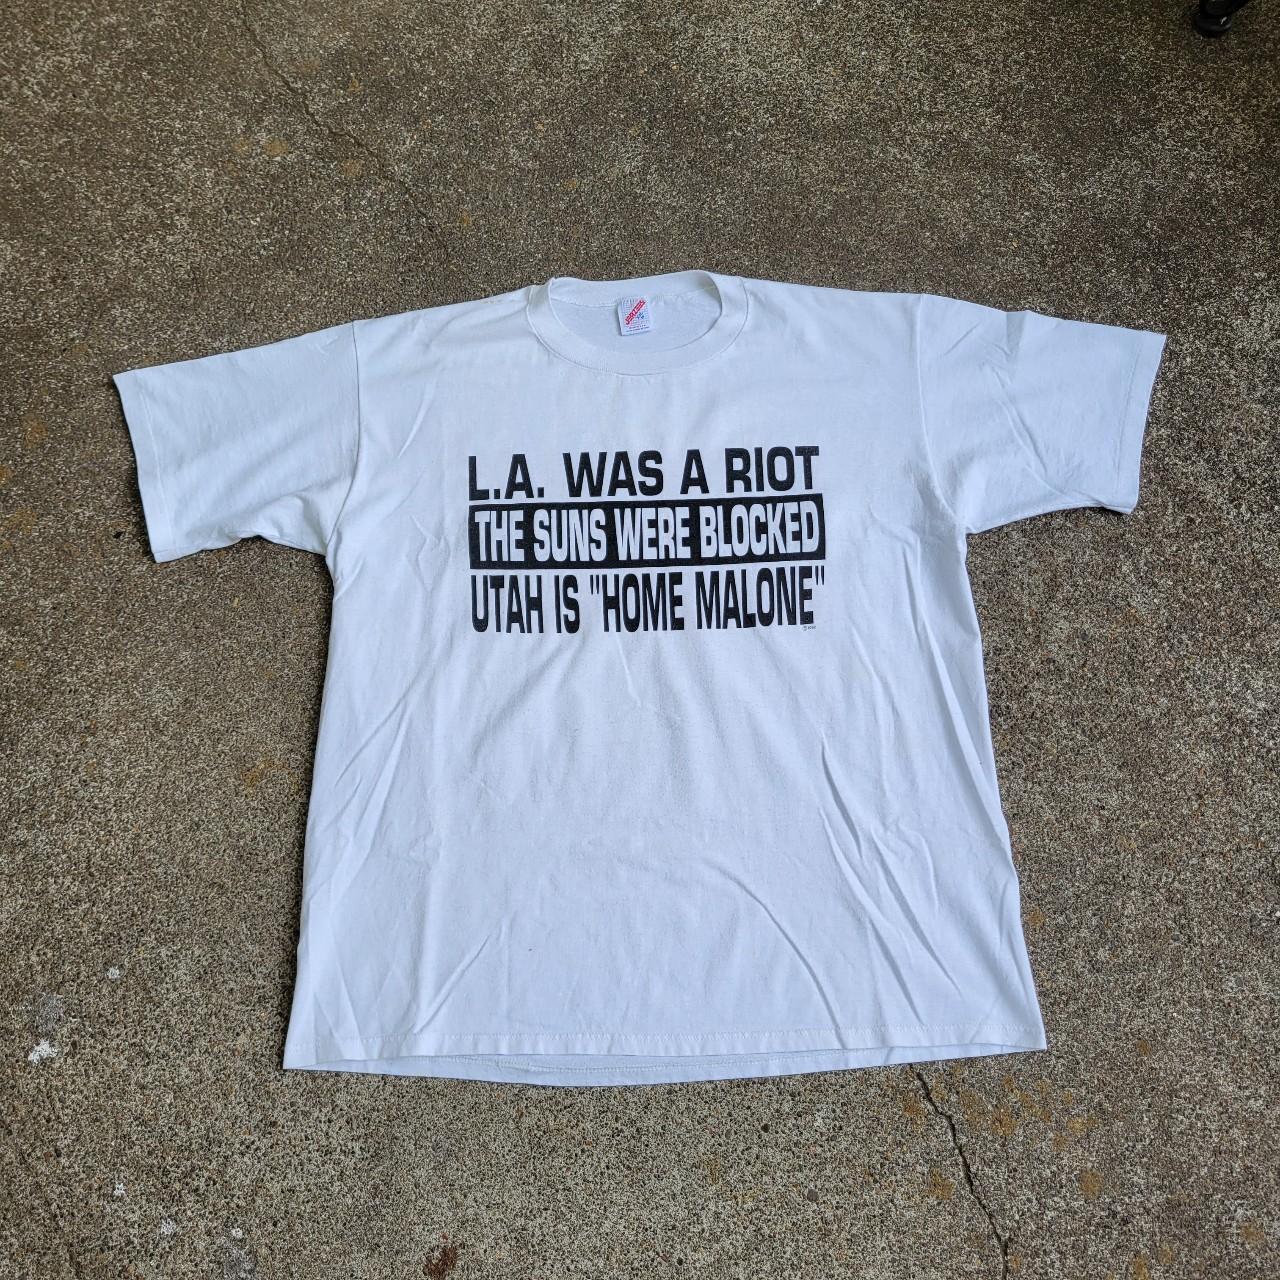 Clippers playoff game T shirt this was from when - Depop